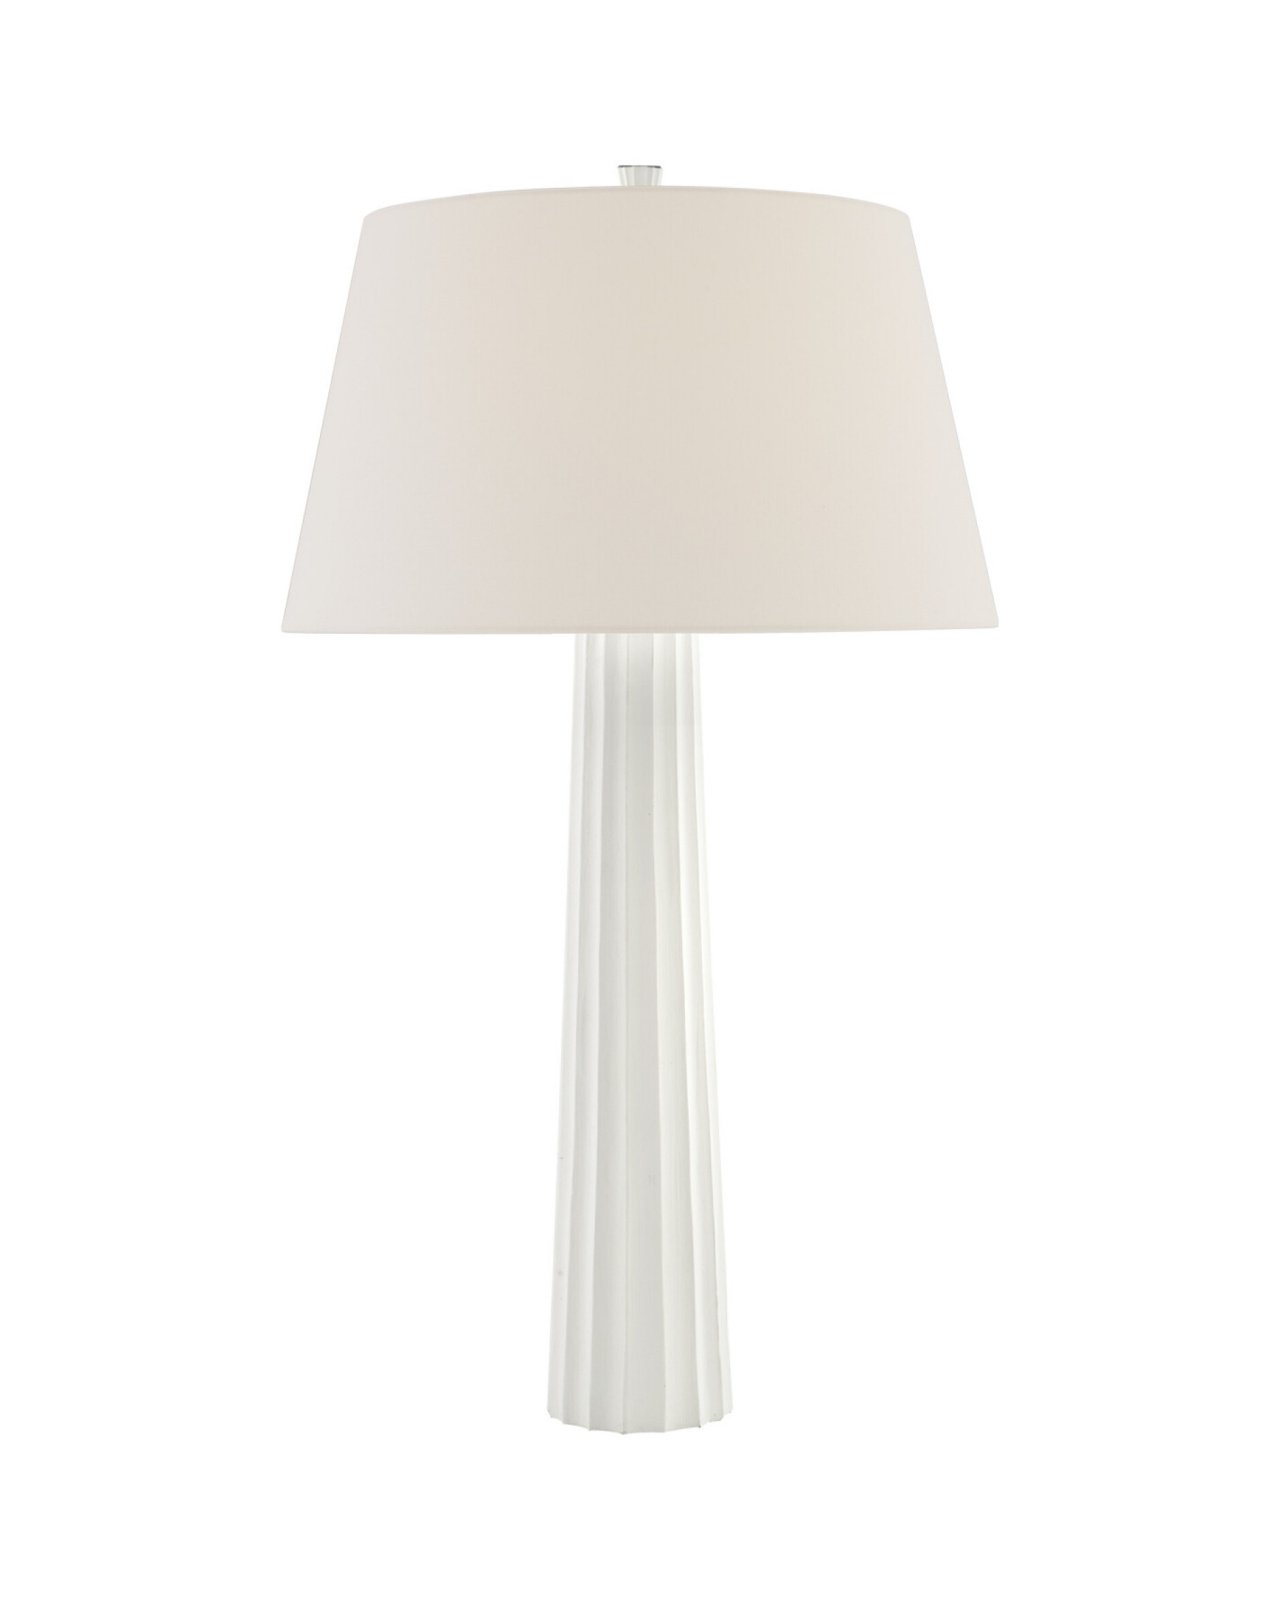 Fluted Spire Table Lamp White Large